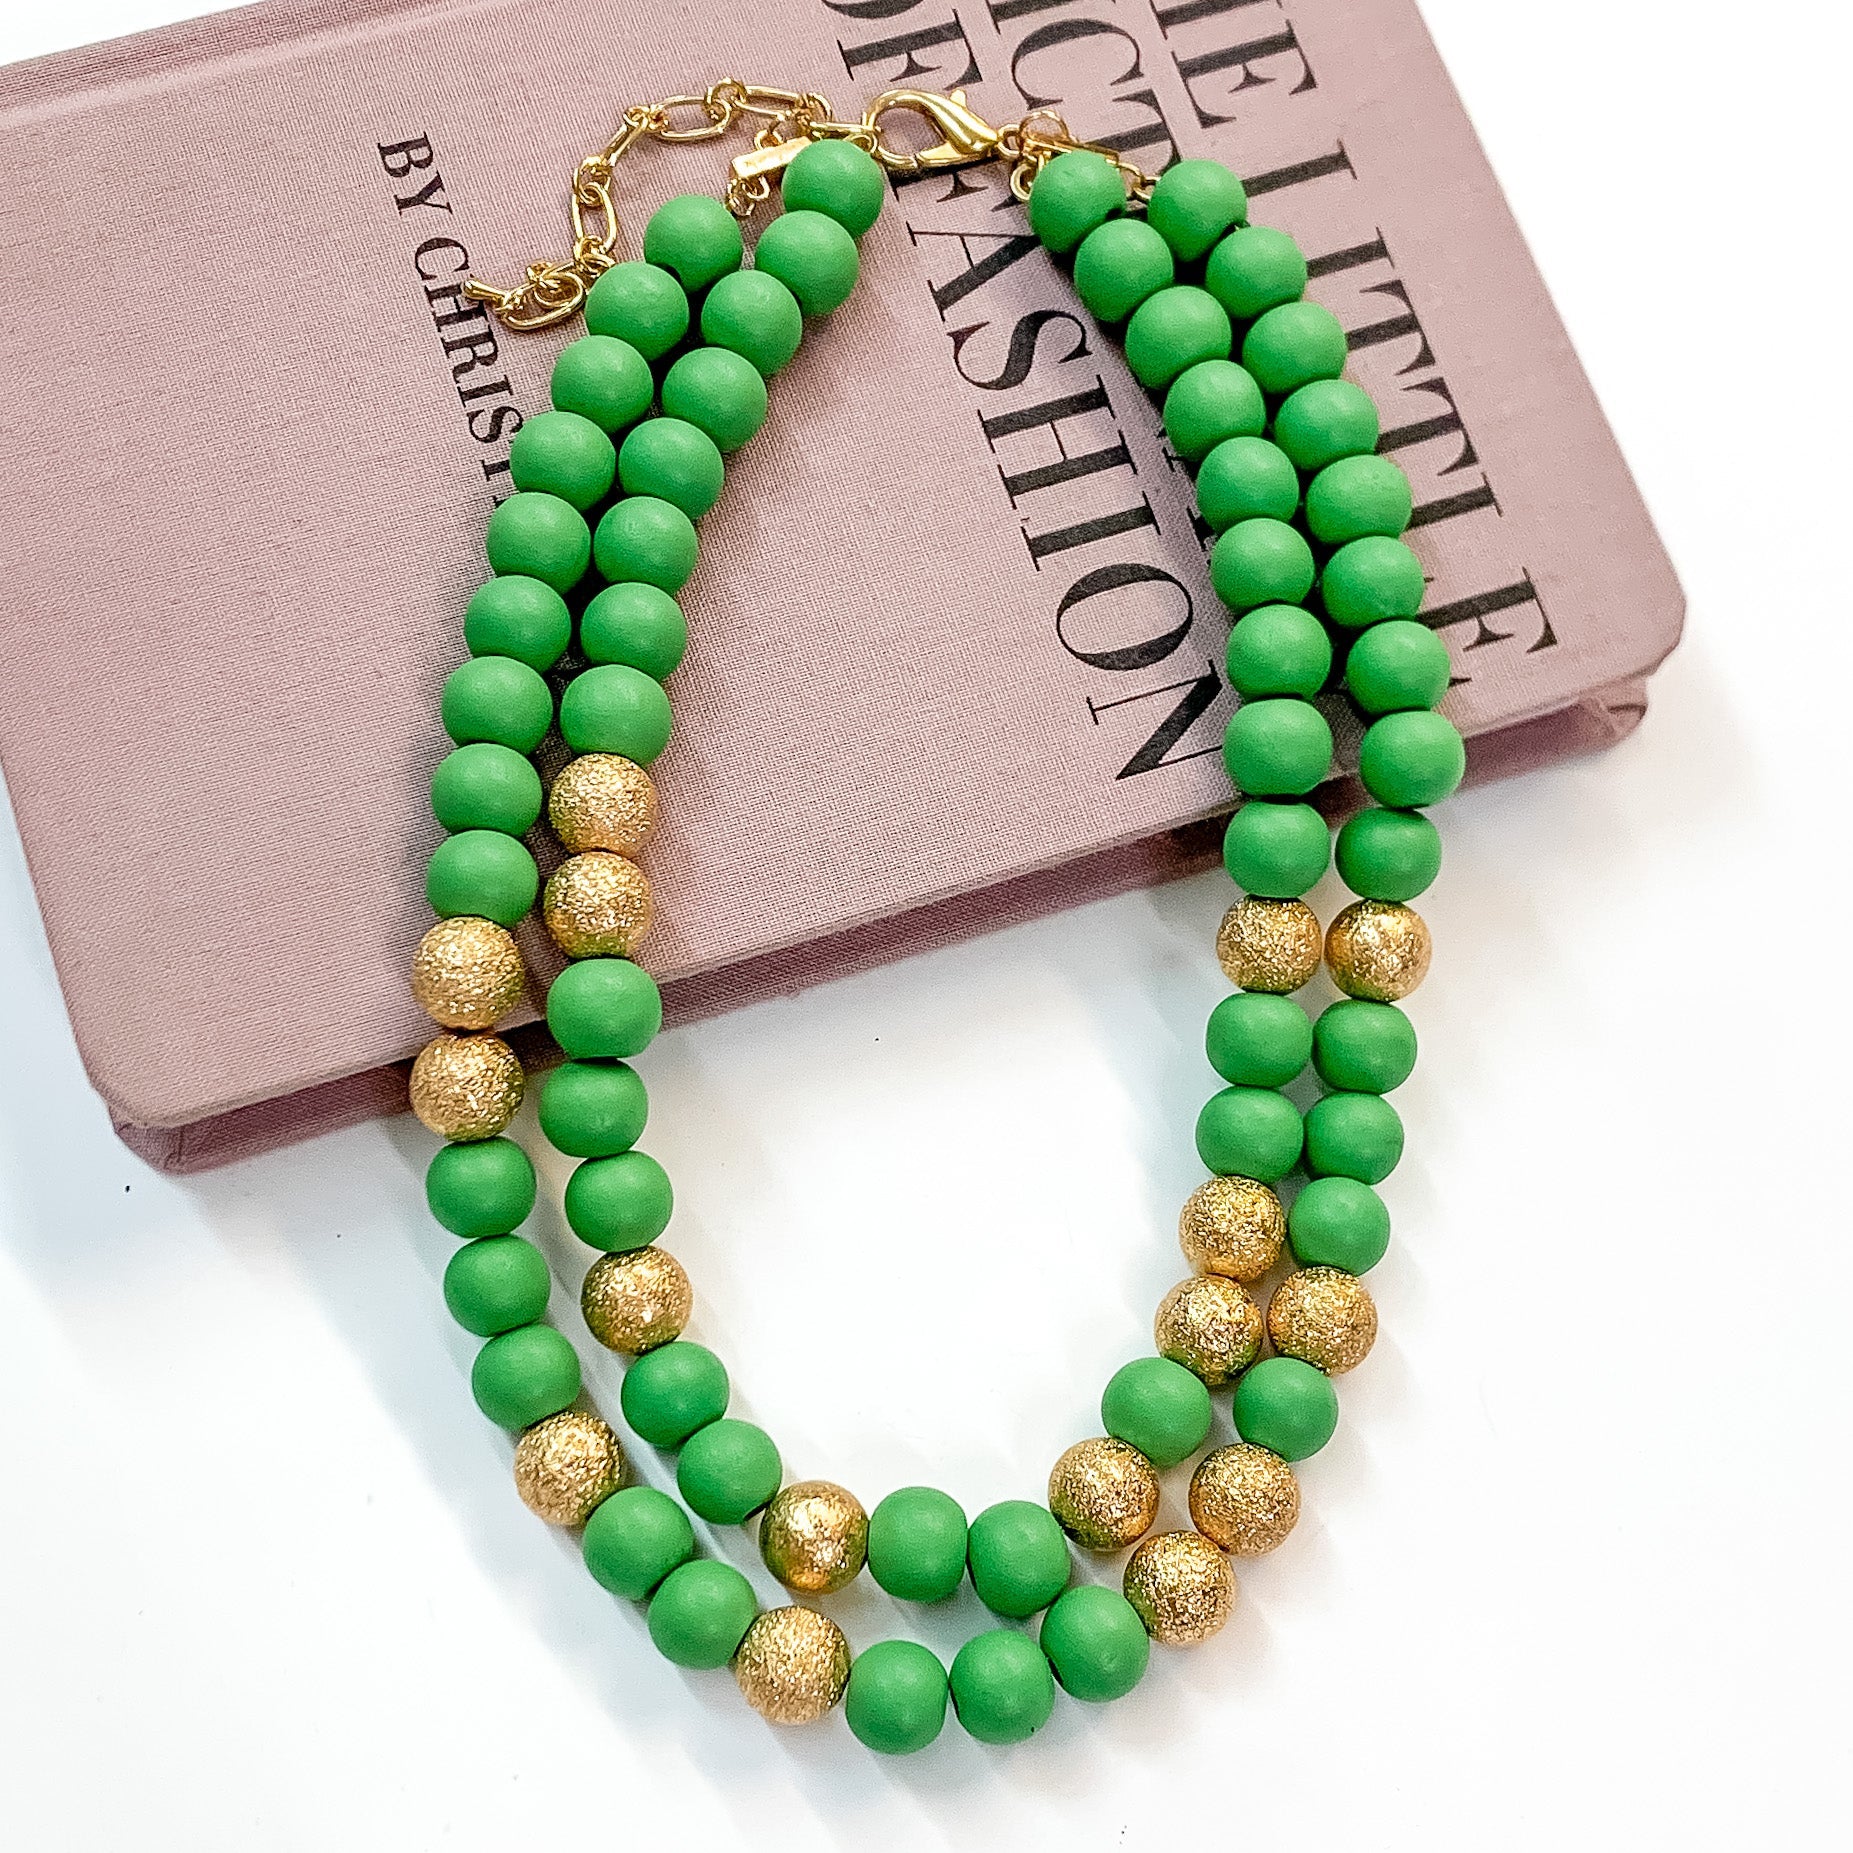 Pictured partially on a mauve colored book on a white background is a two strand green beaded necklace with gold beaded spacers and gold hardware. 